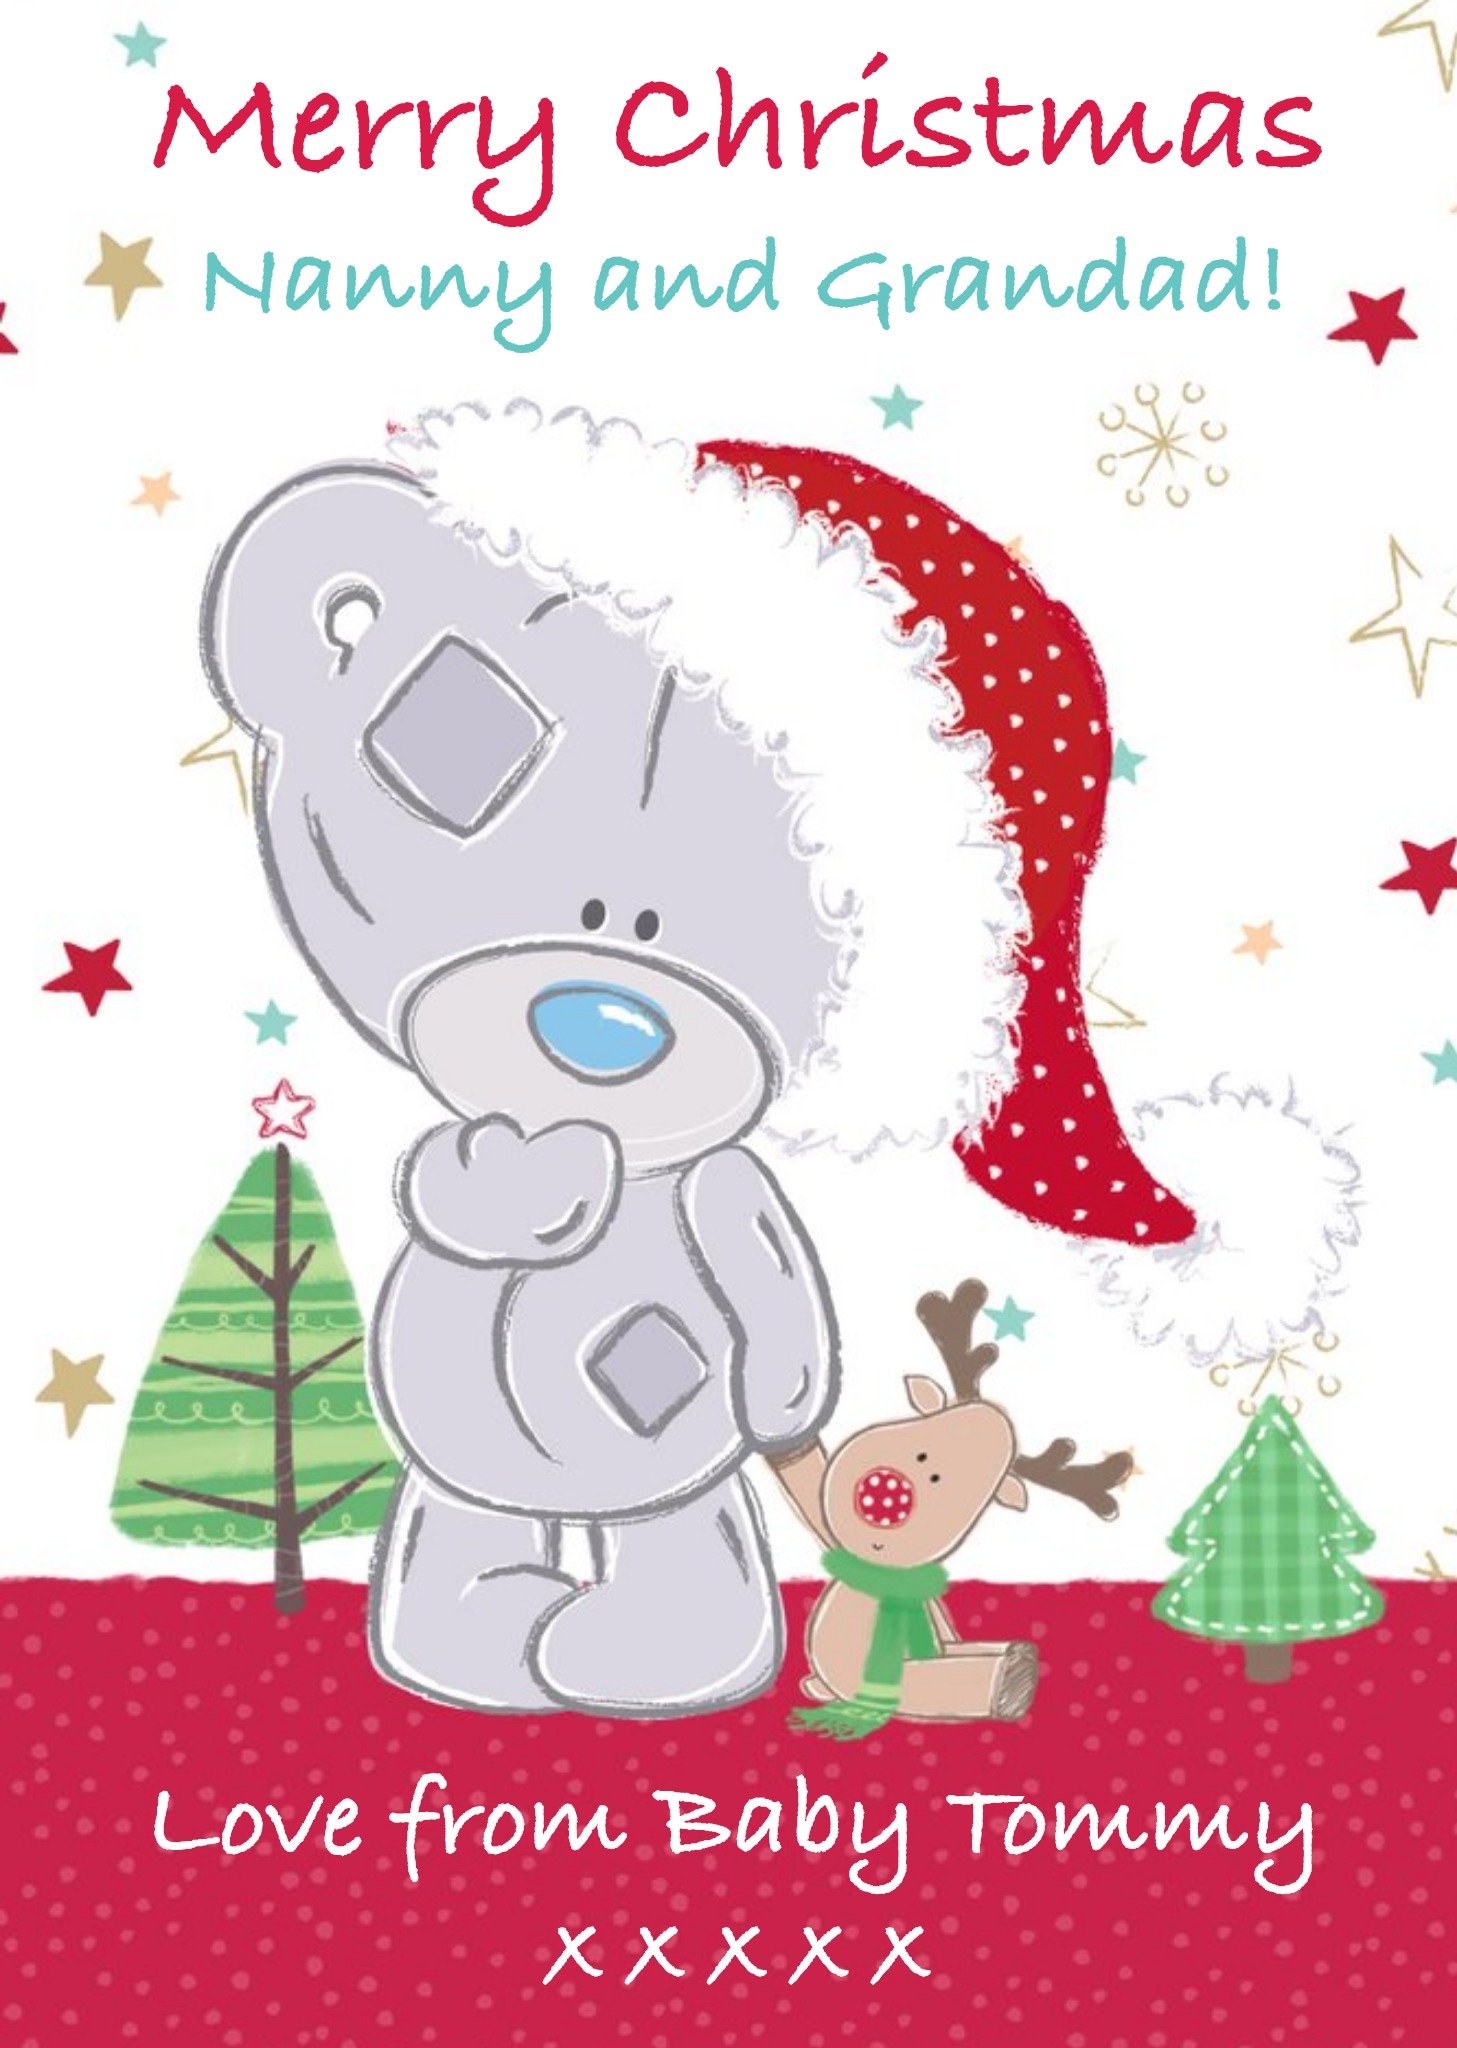 Tiny Tatty Teddy Tatty Teddy With Little Reindeer Personalised Christmas Card For Grandparents, Larg